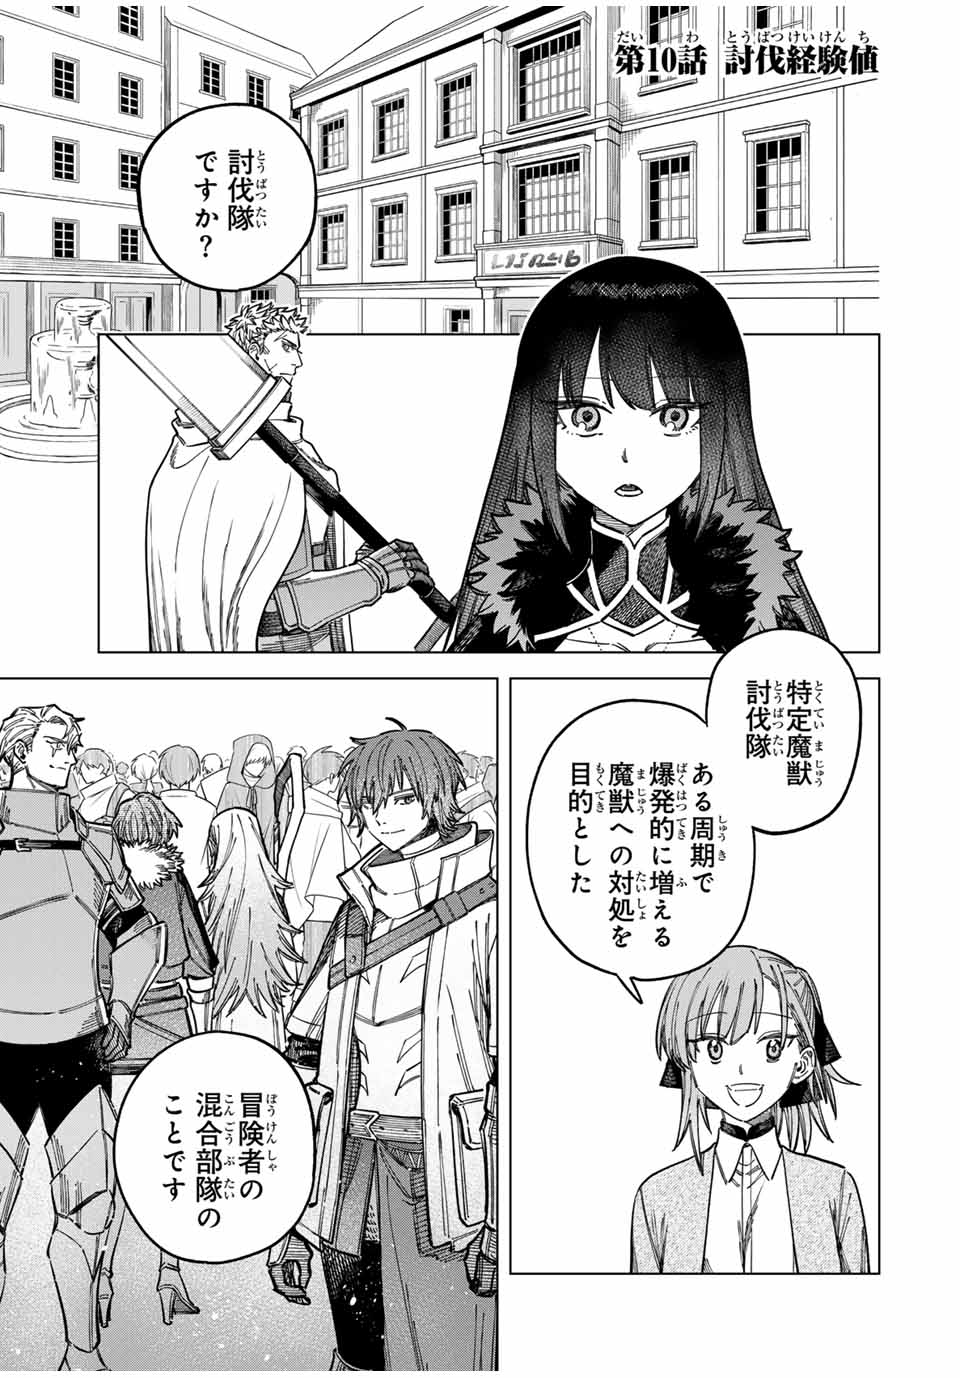 Witch and Mercenary 魔女と傭兵 第10話 - Page 1